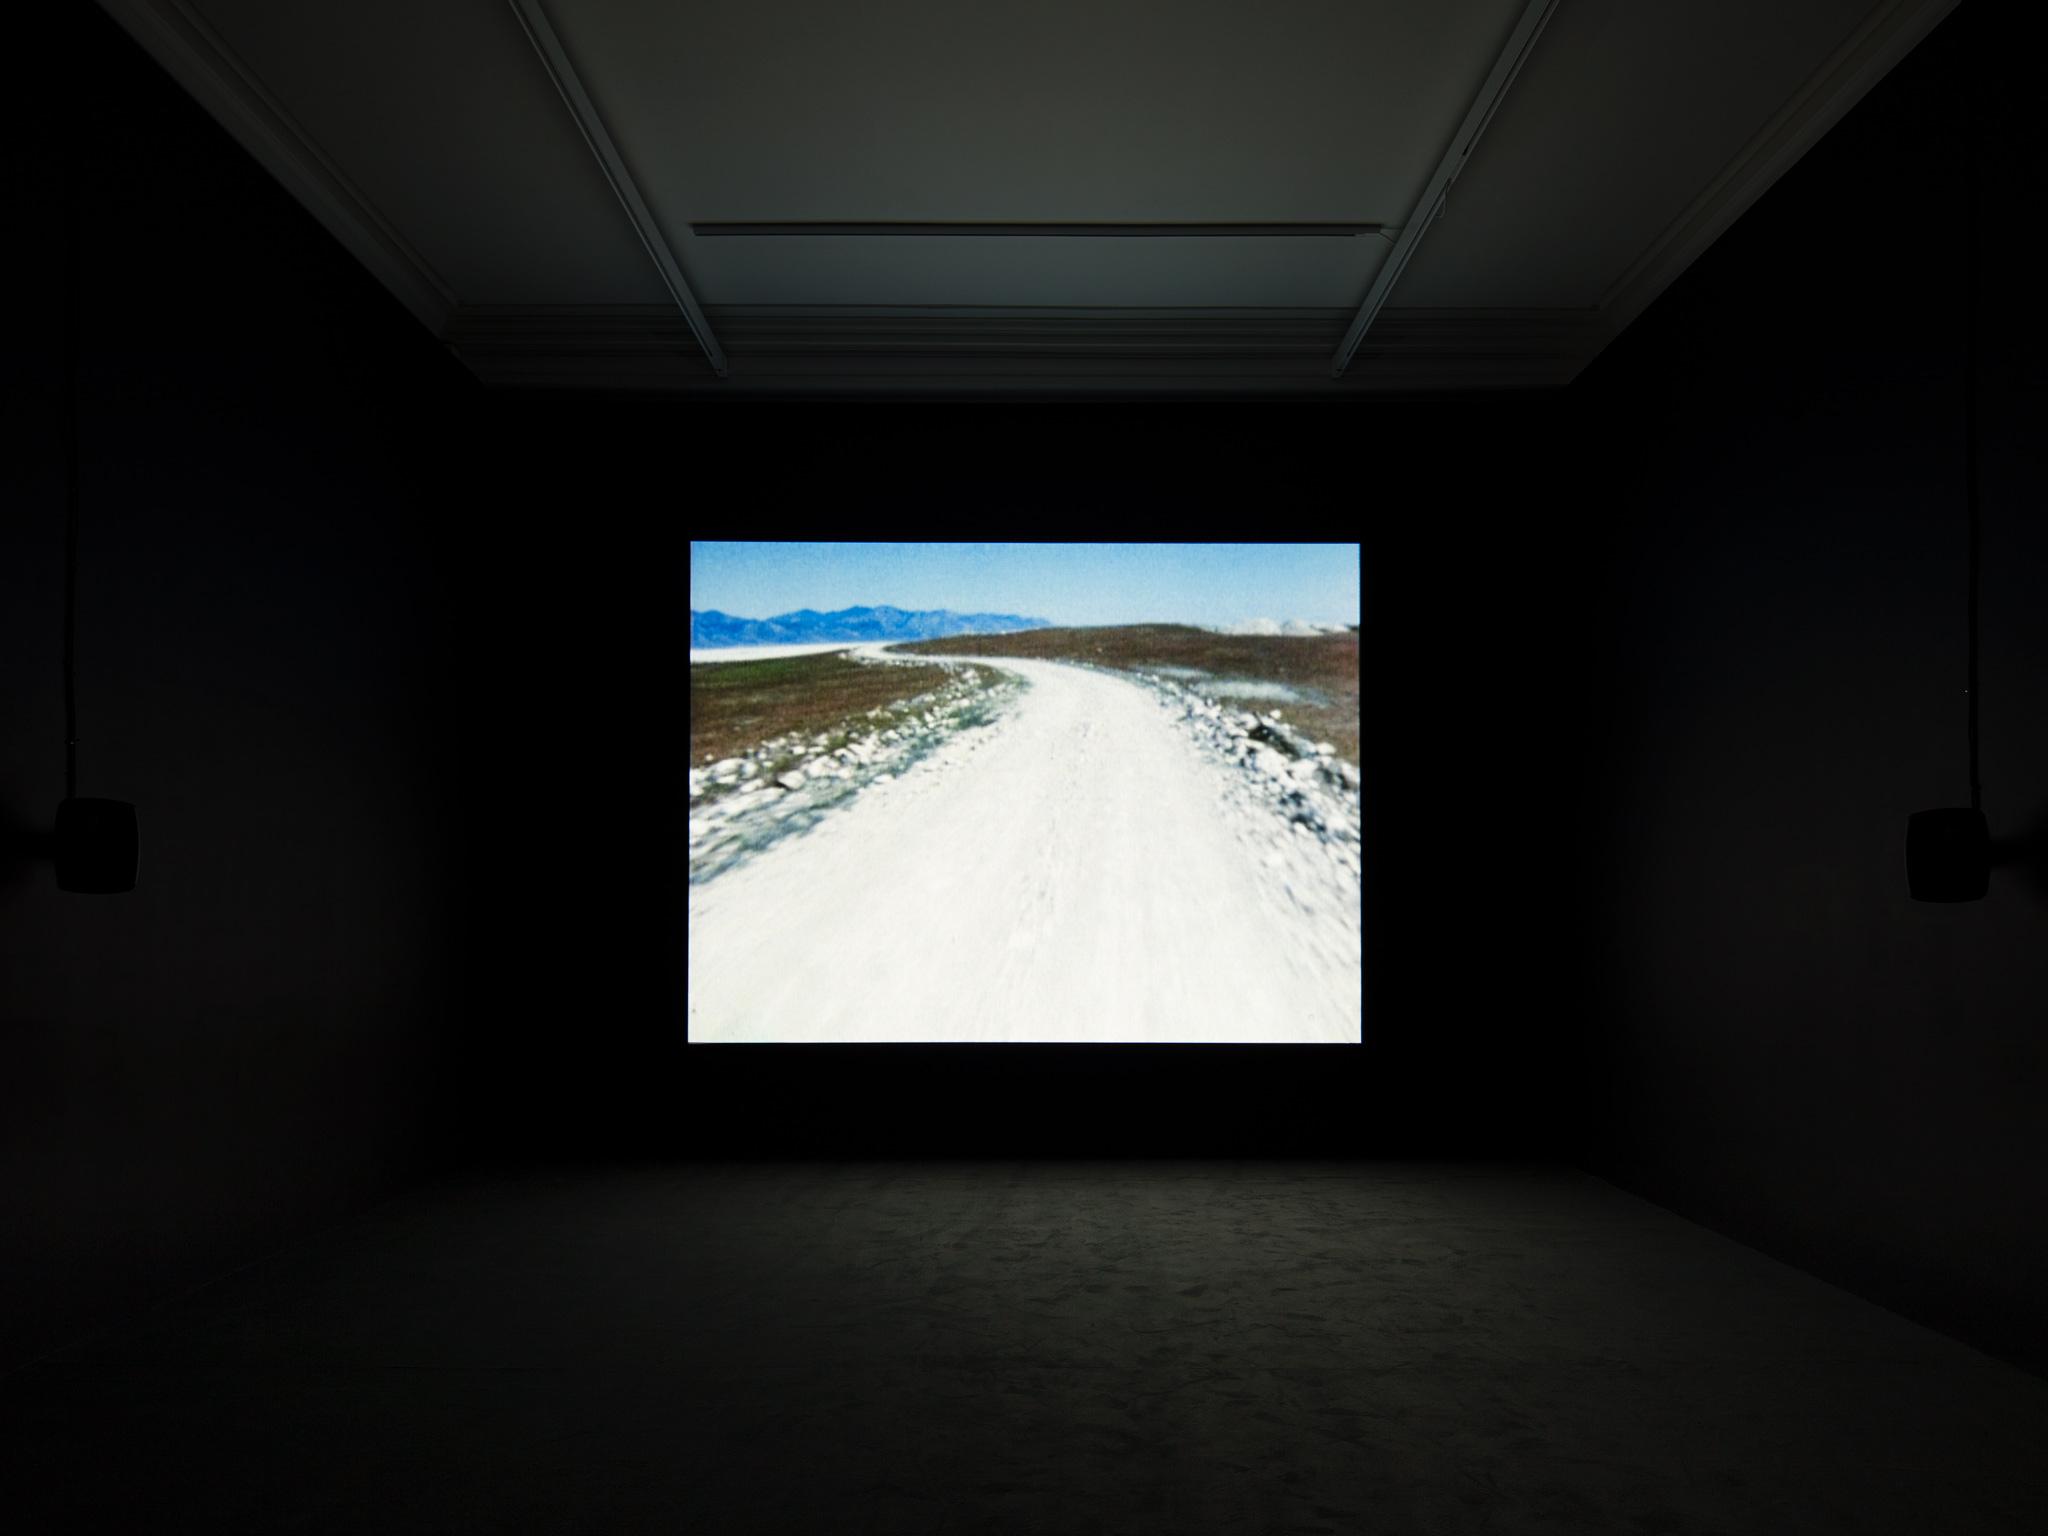 a film screening room with an image of a dirt road projected